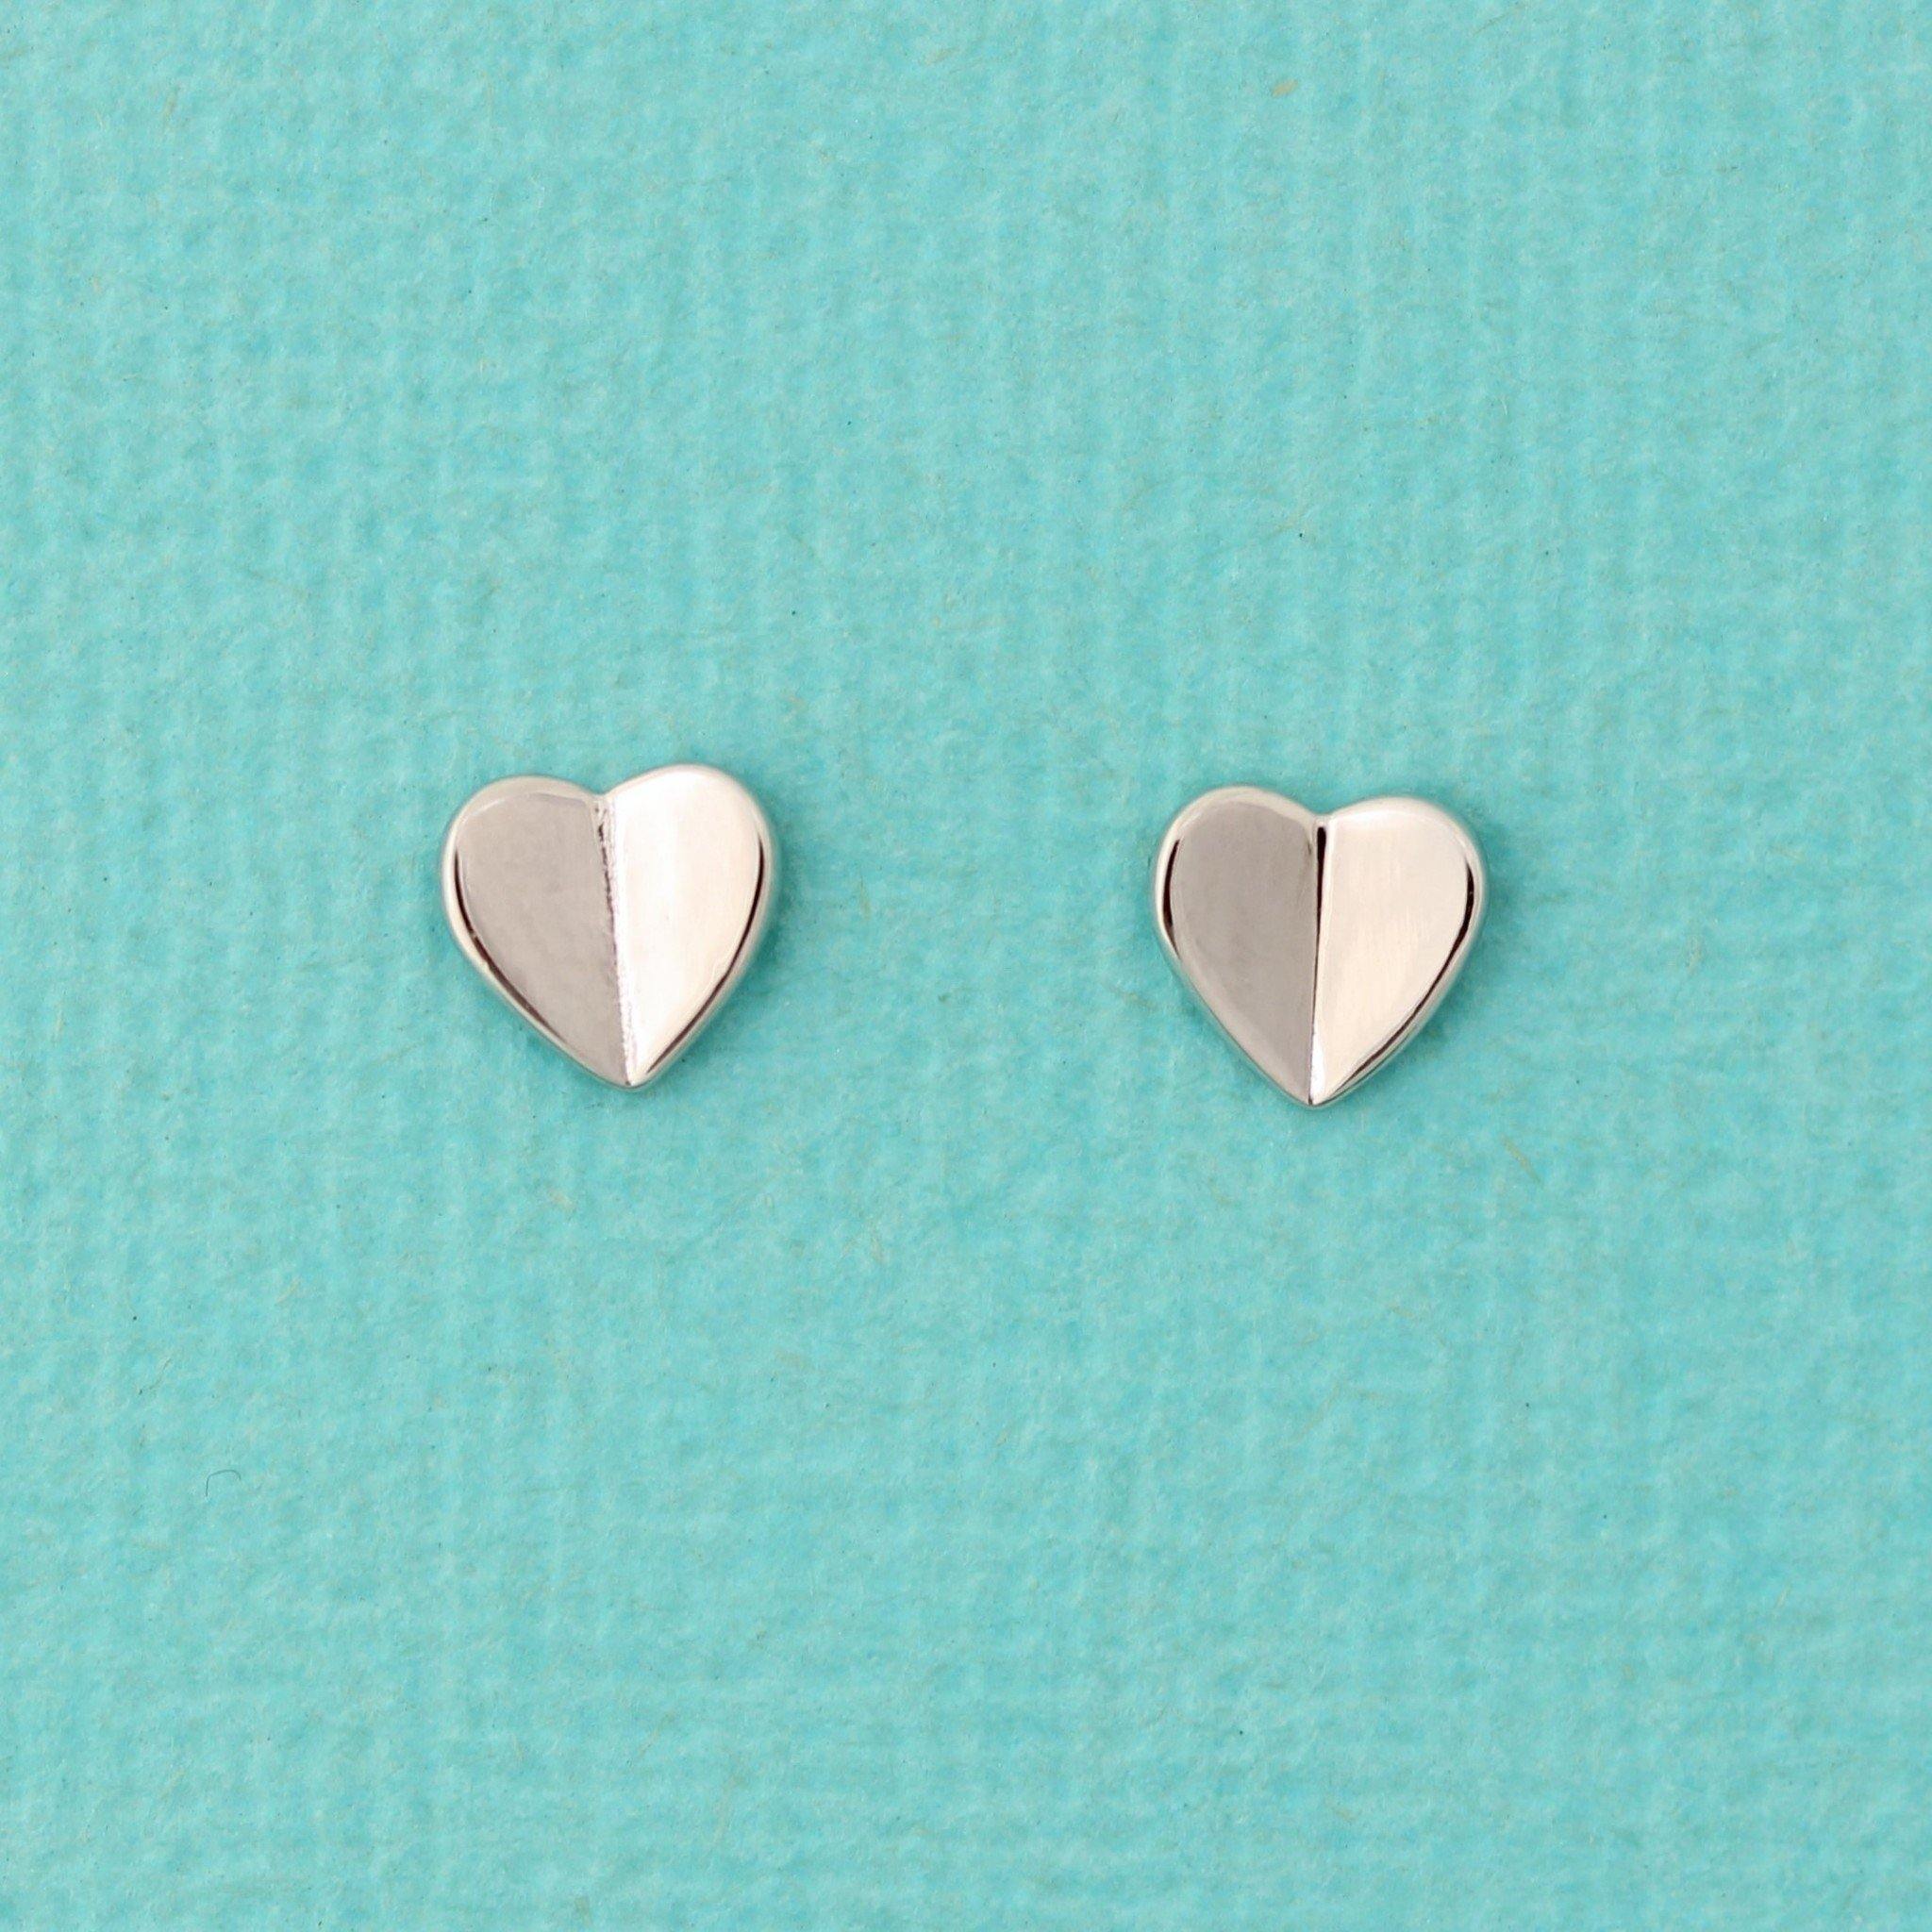 Sterling Silver Small 6mm Heart Stud Earrings Rhodium Plated - STERLING SILVER DESIGNS